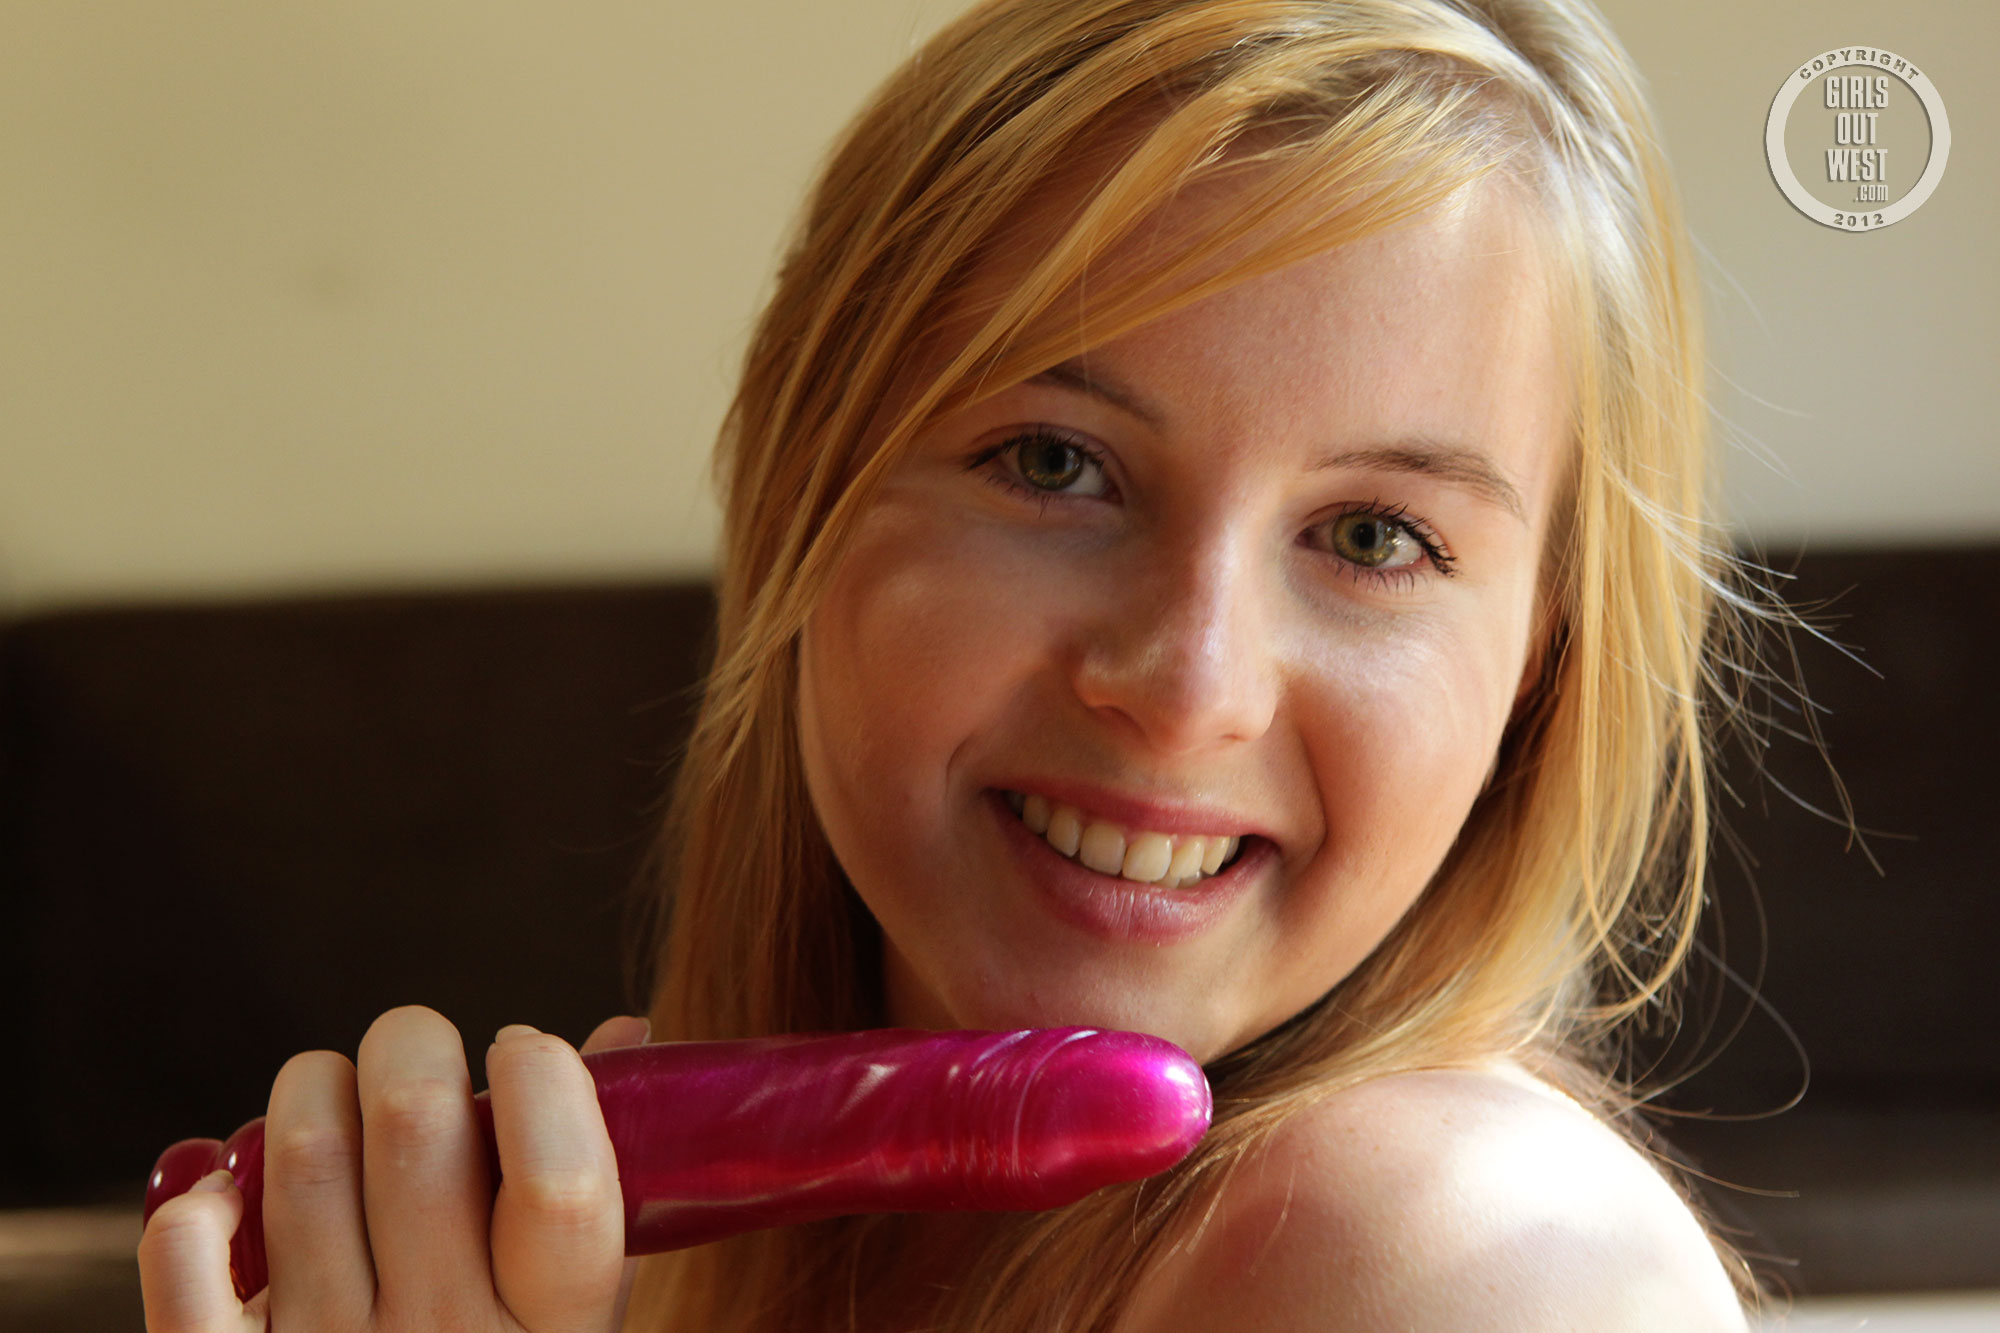 wpid-fair-blonde-amateur-bree-whips-out-her-long-dildo-and-shoves-it-in-her-hairy-squish8.jpg